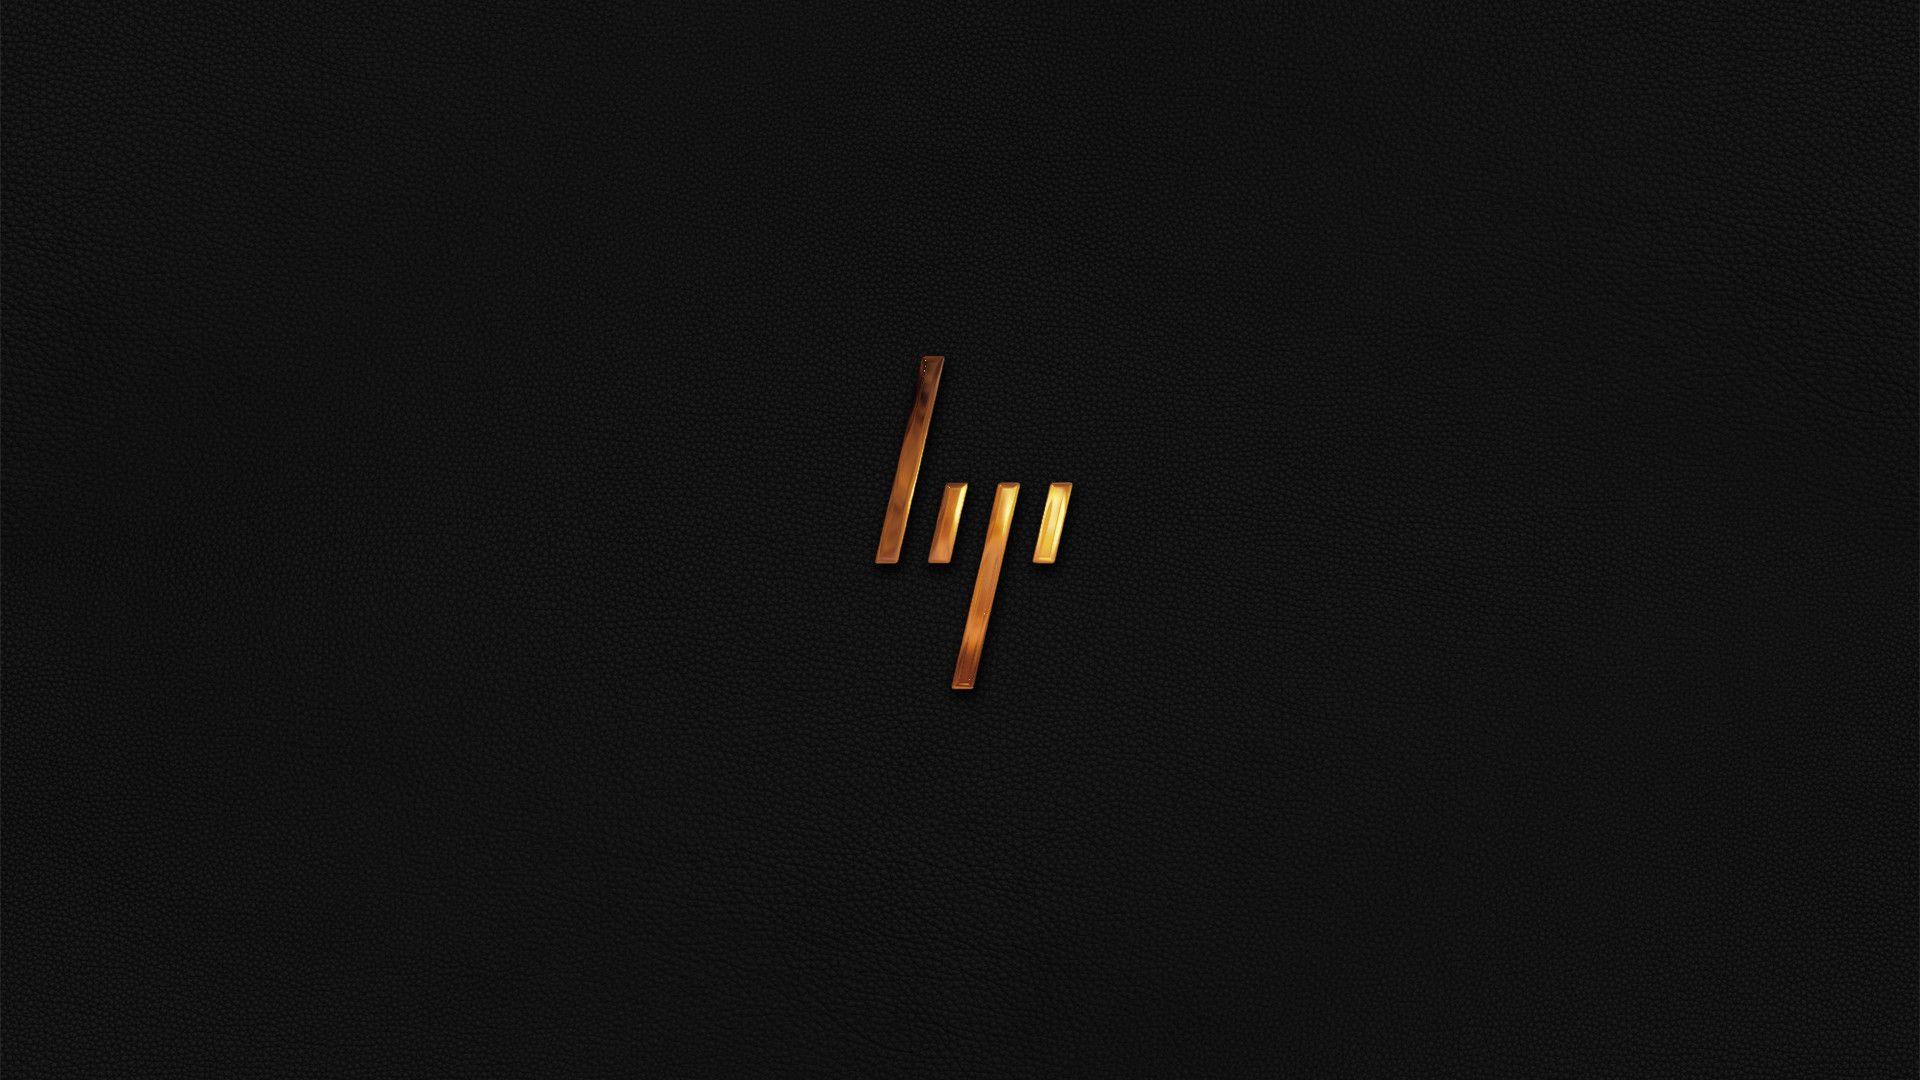 Hp Spectre Wallpapers Top Free Hp Spectre Backgrounds Wallpaperaccess